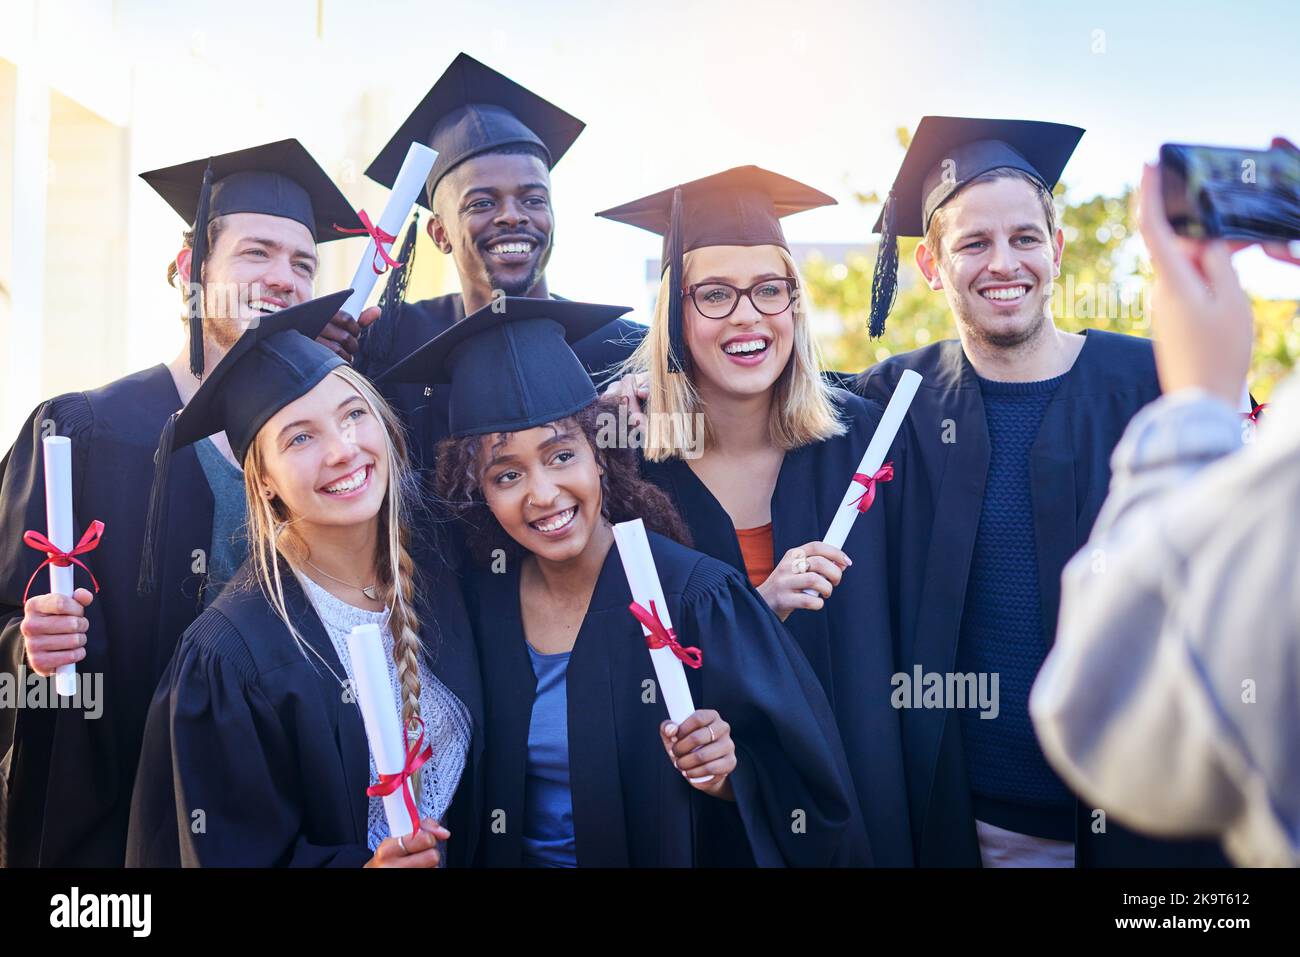 Getting a group photo of everyone. students on graduation day from university. Stock Photo